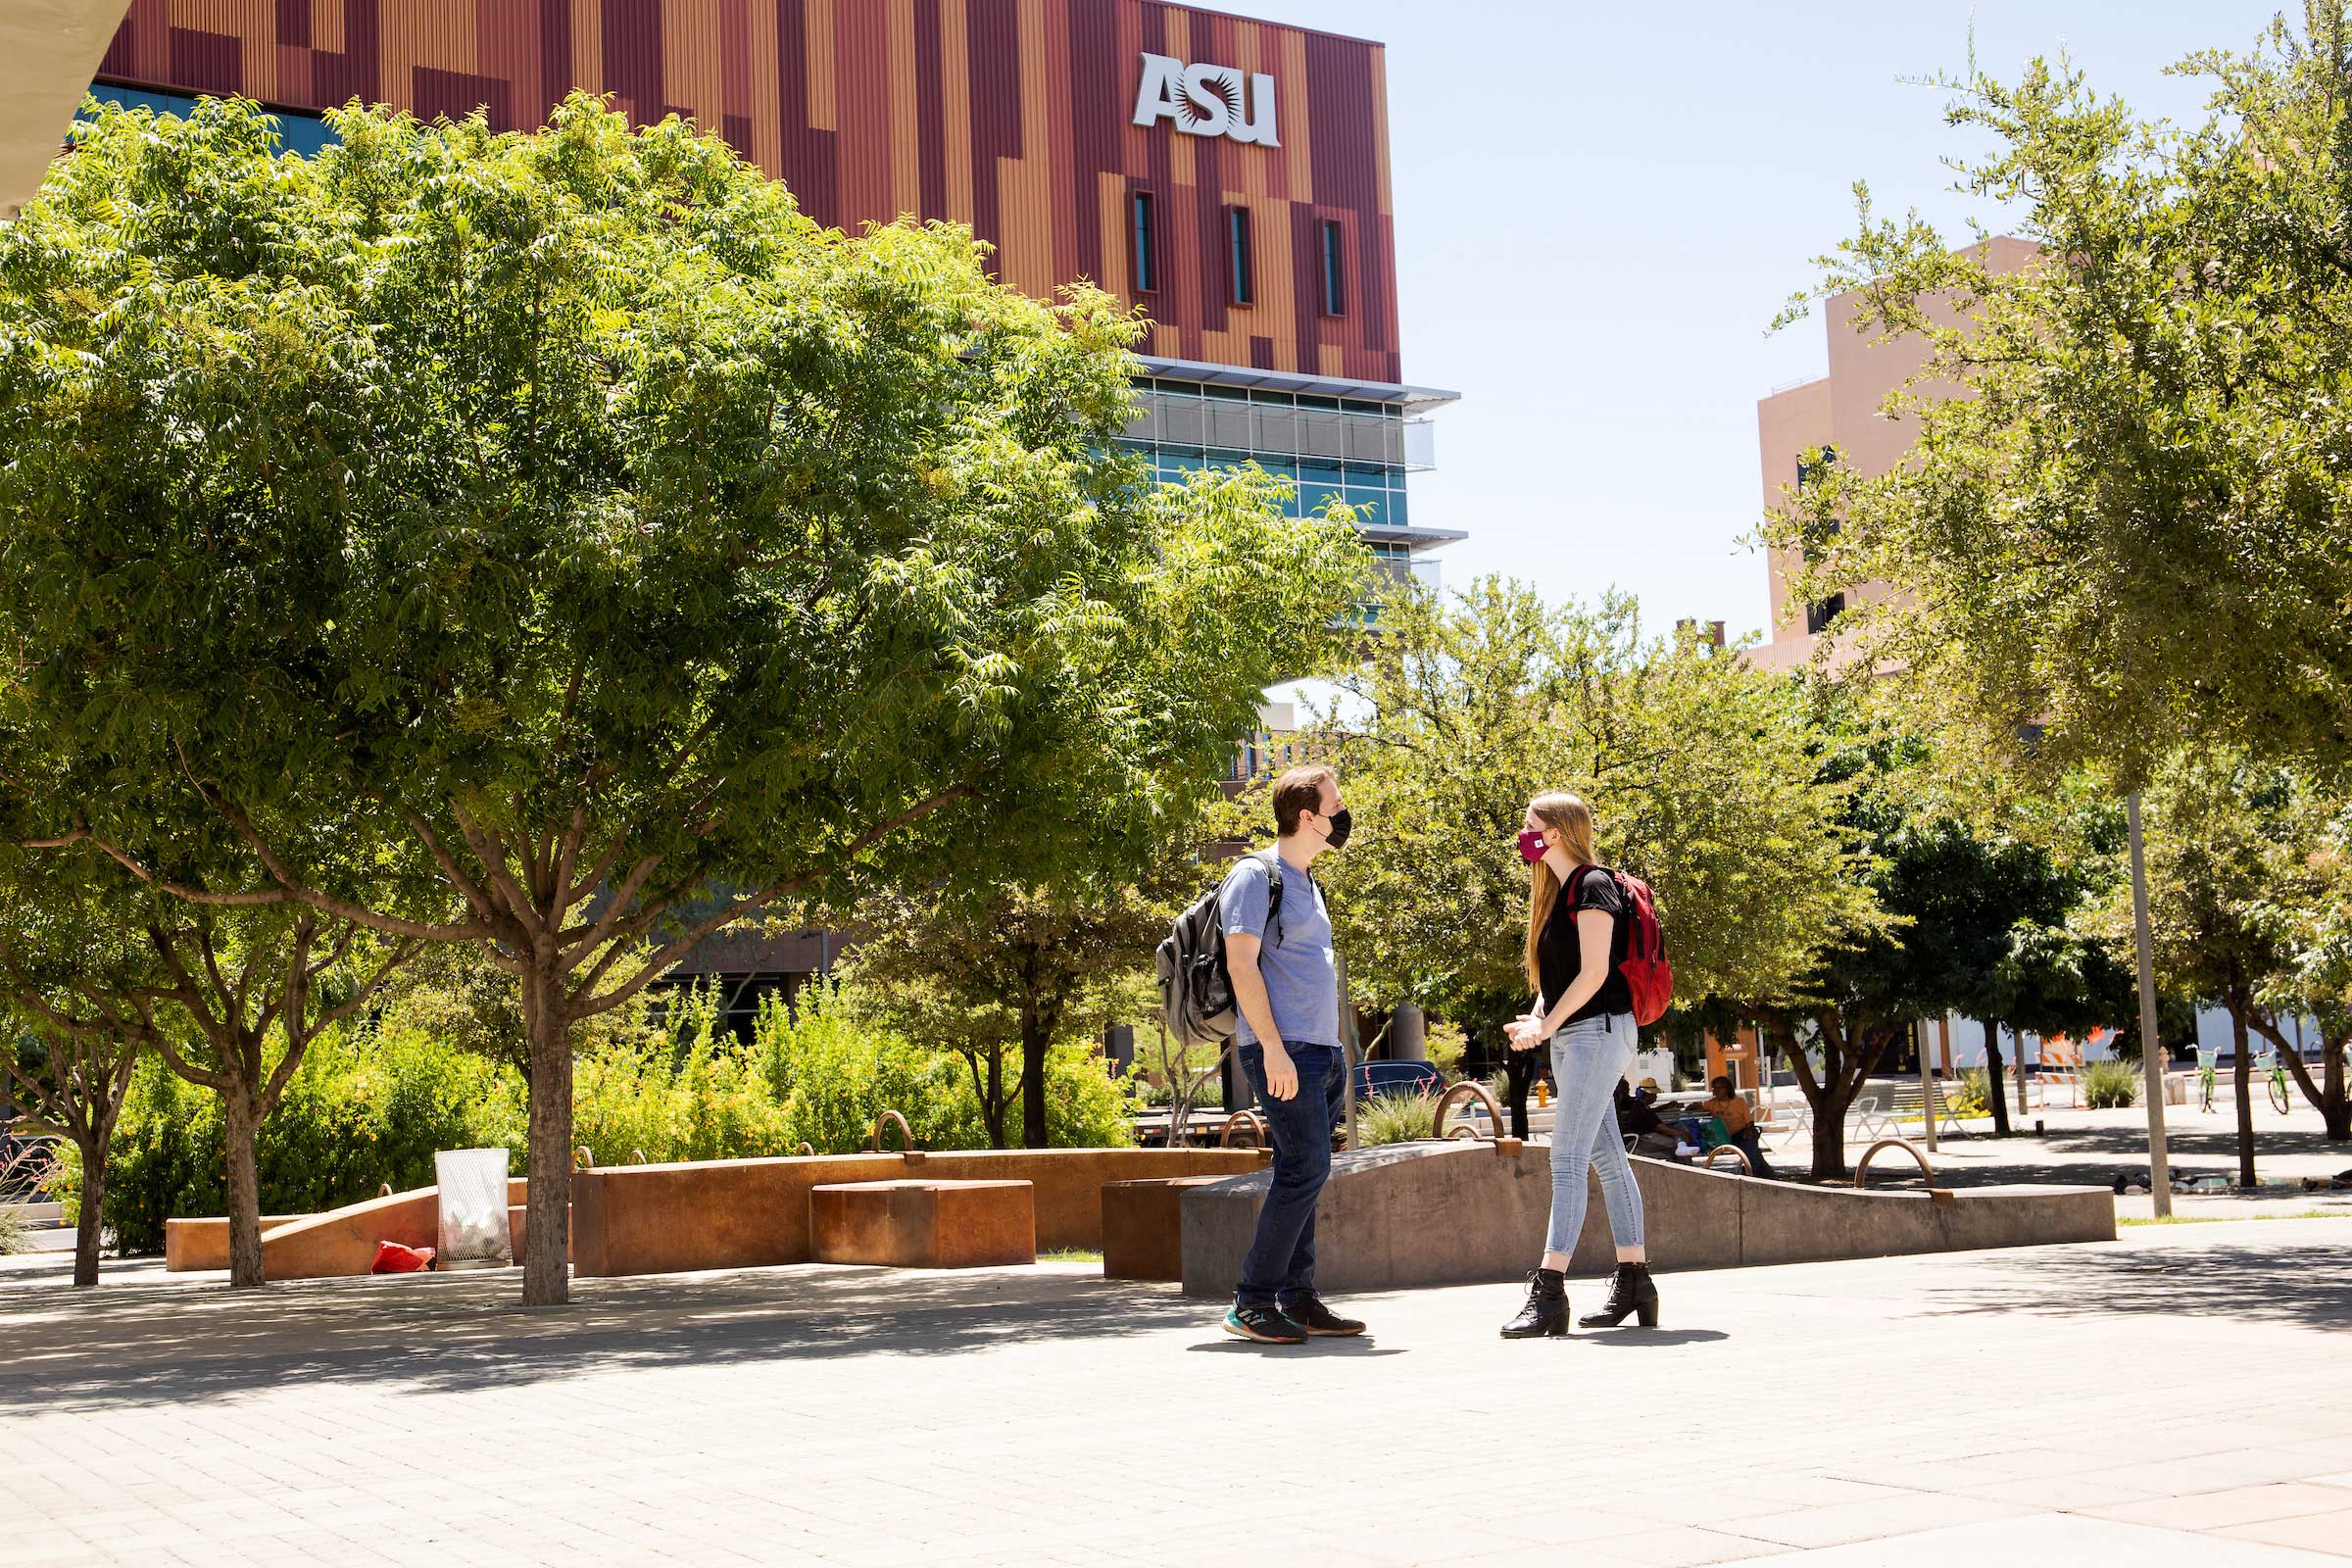 ASU named a 'best college' by The Princeton Review | ASU News